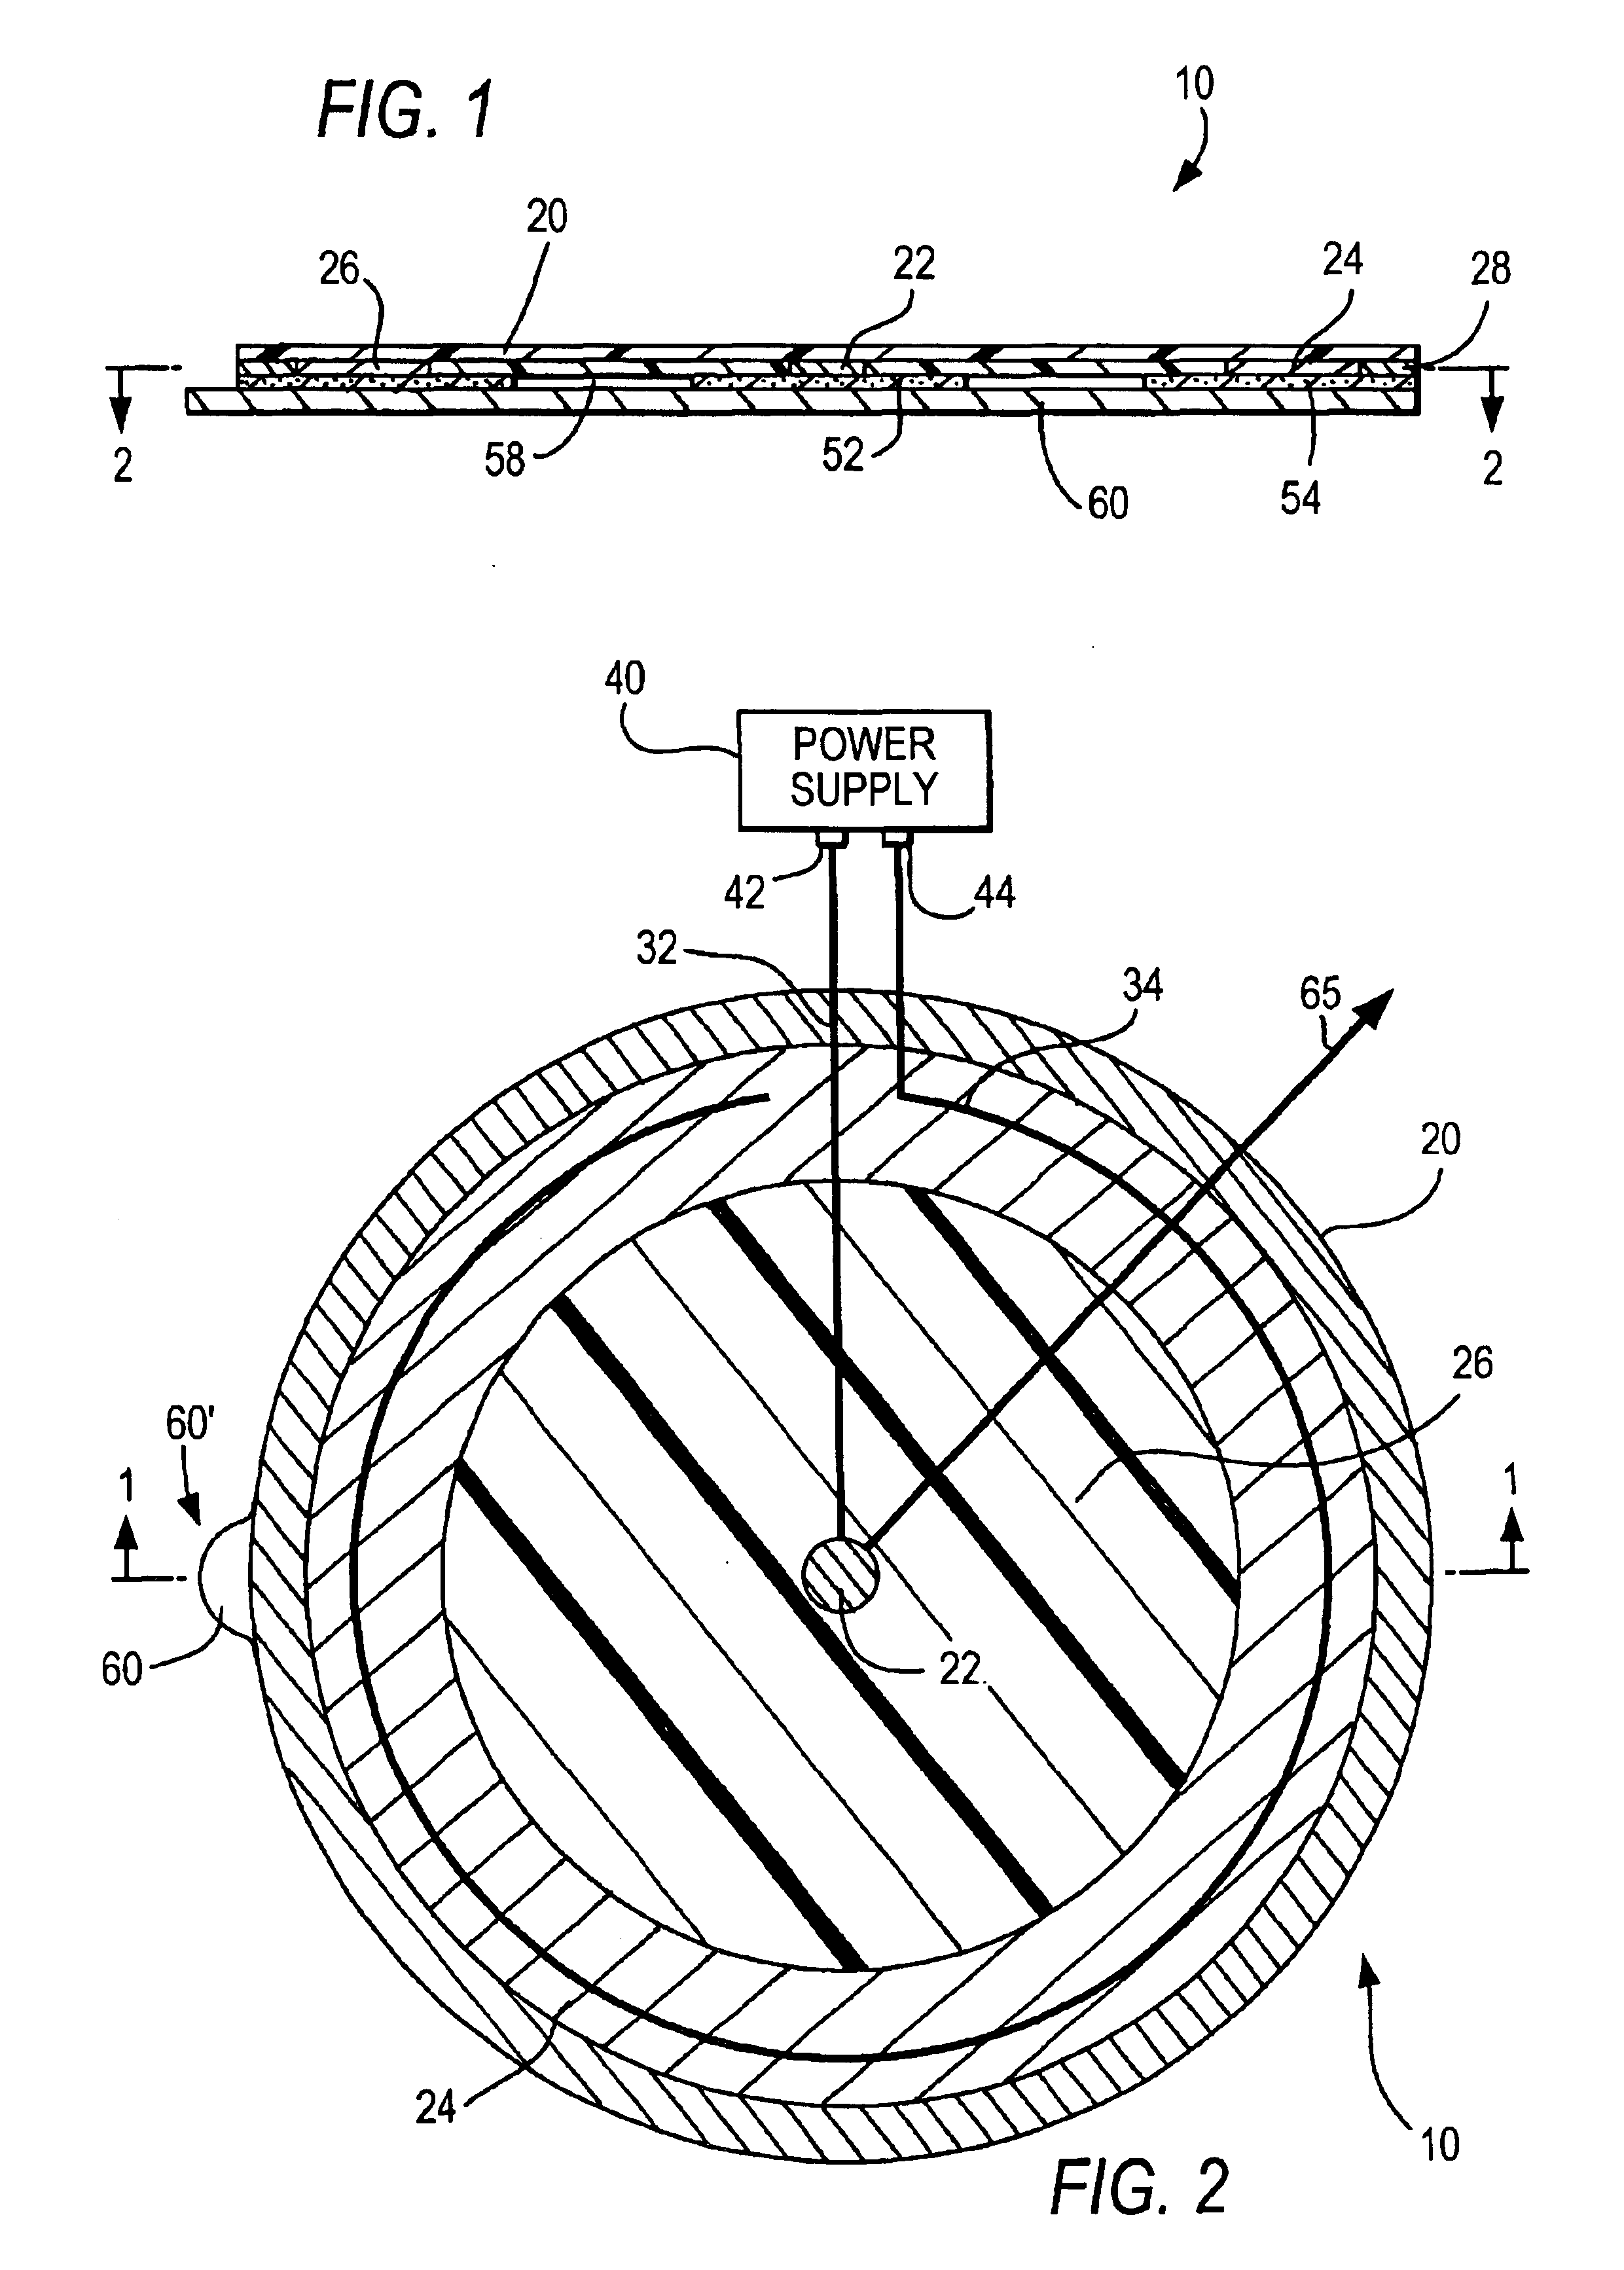 Apparatus and methods for facilitating wound healing